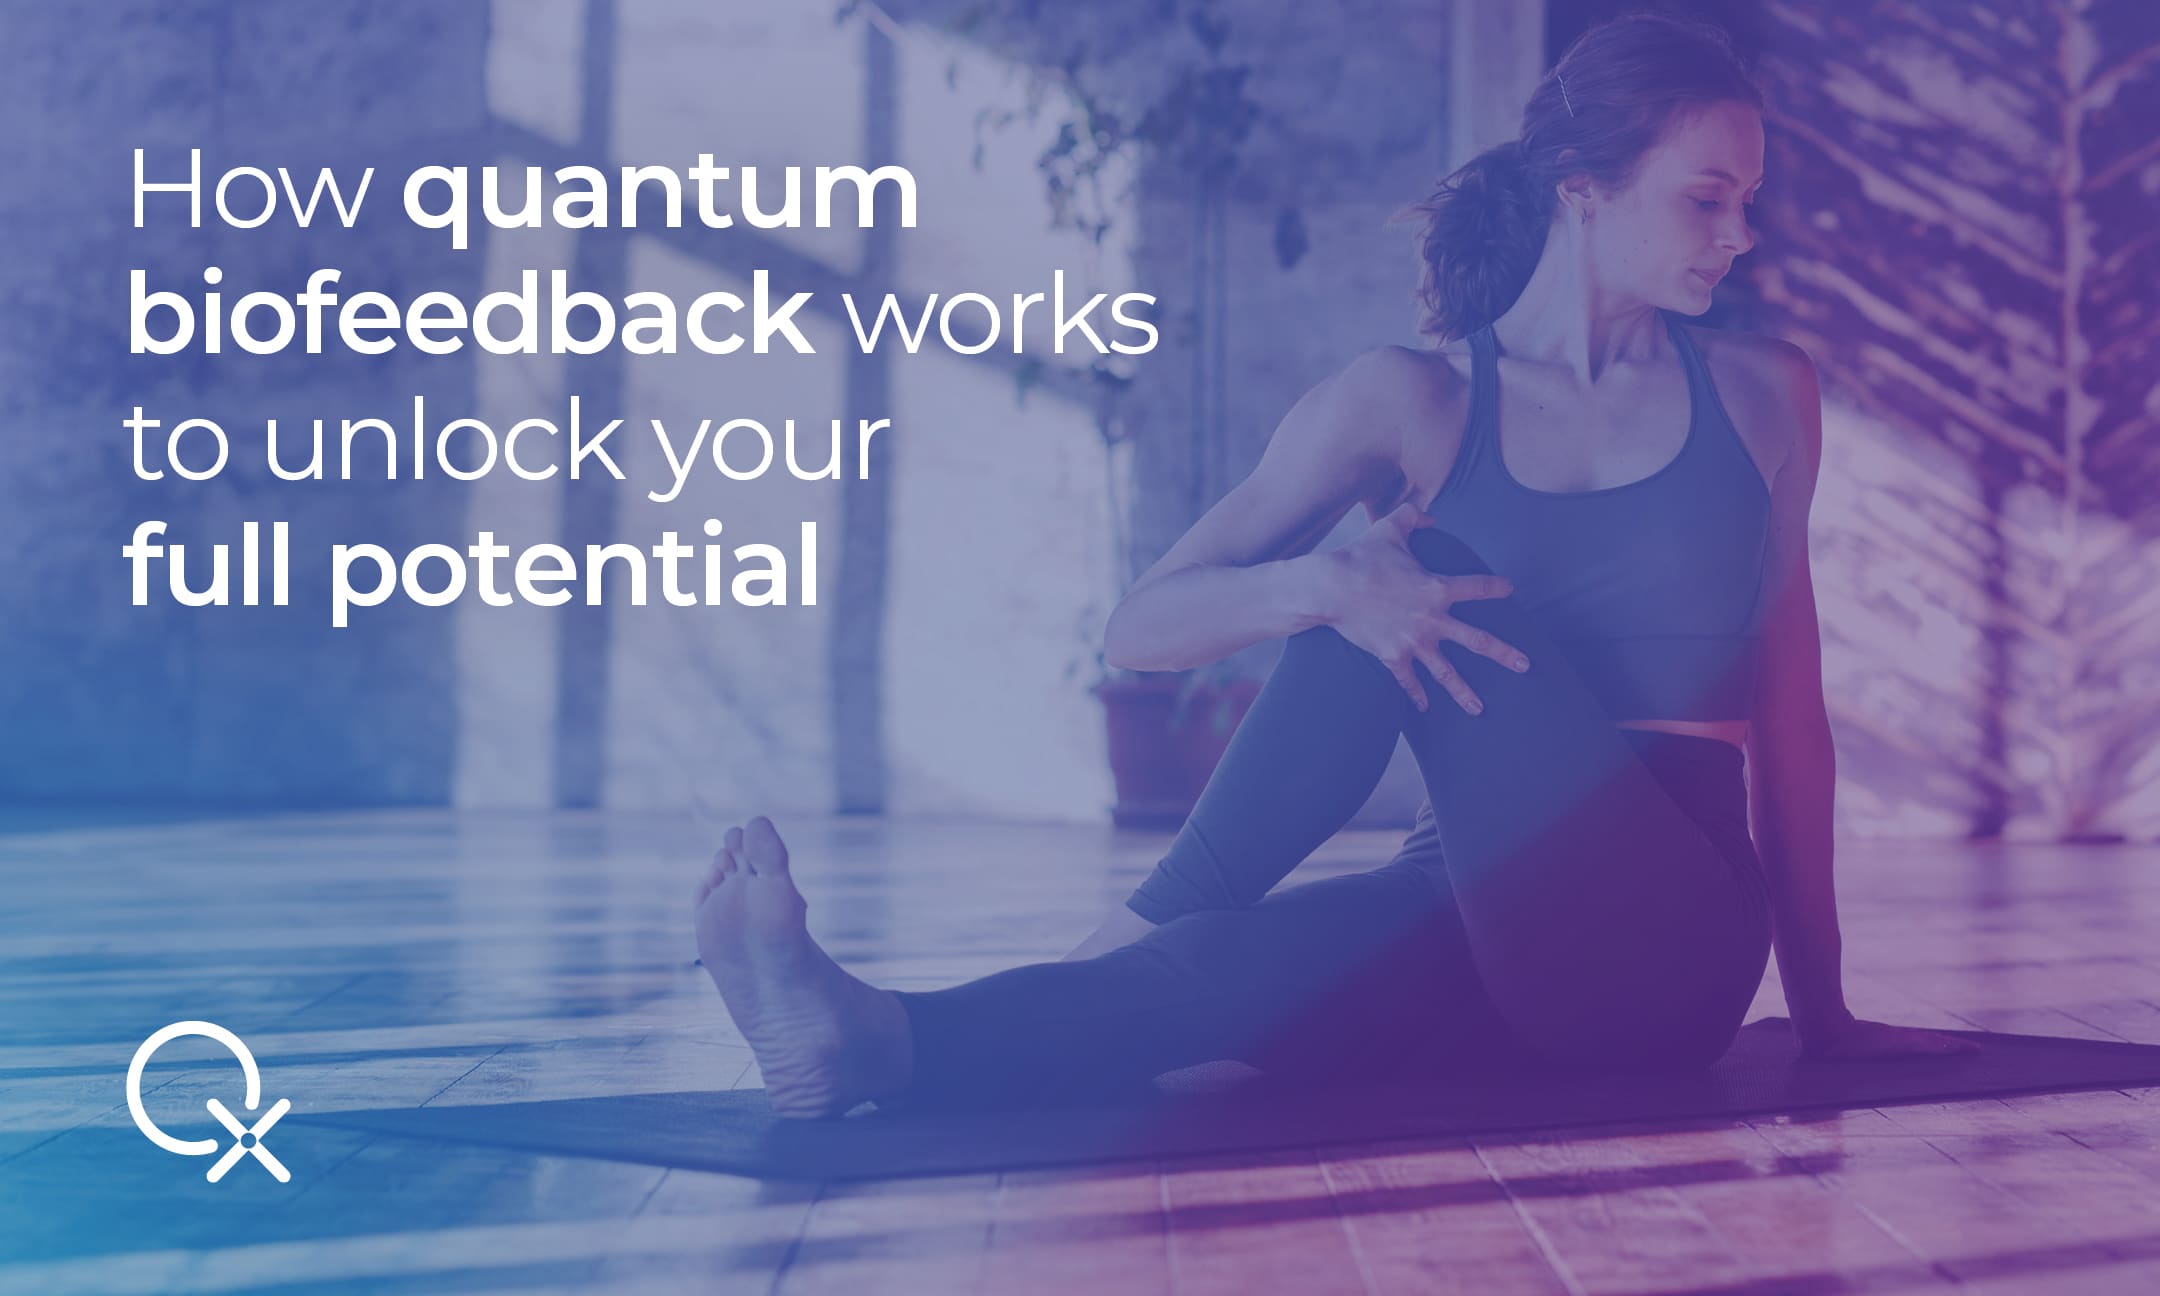 How quantum biofeedback works to unlock your full potential